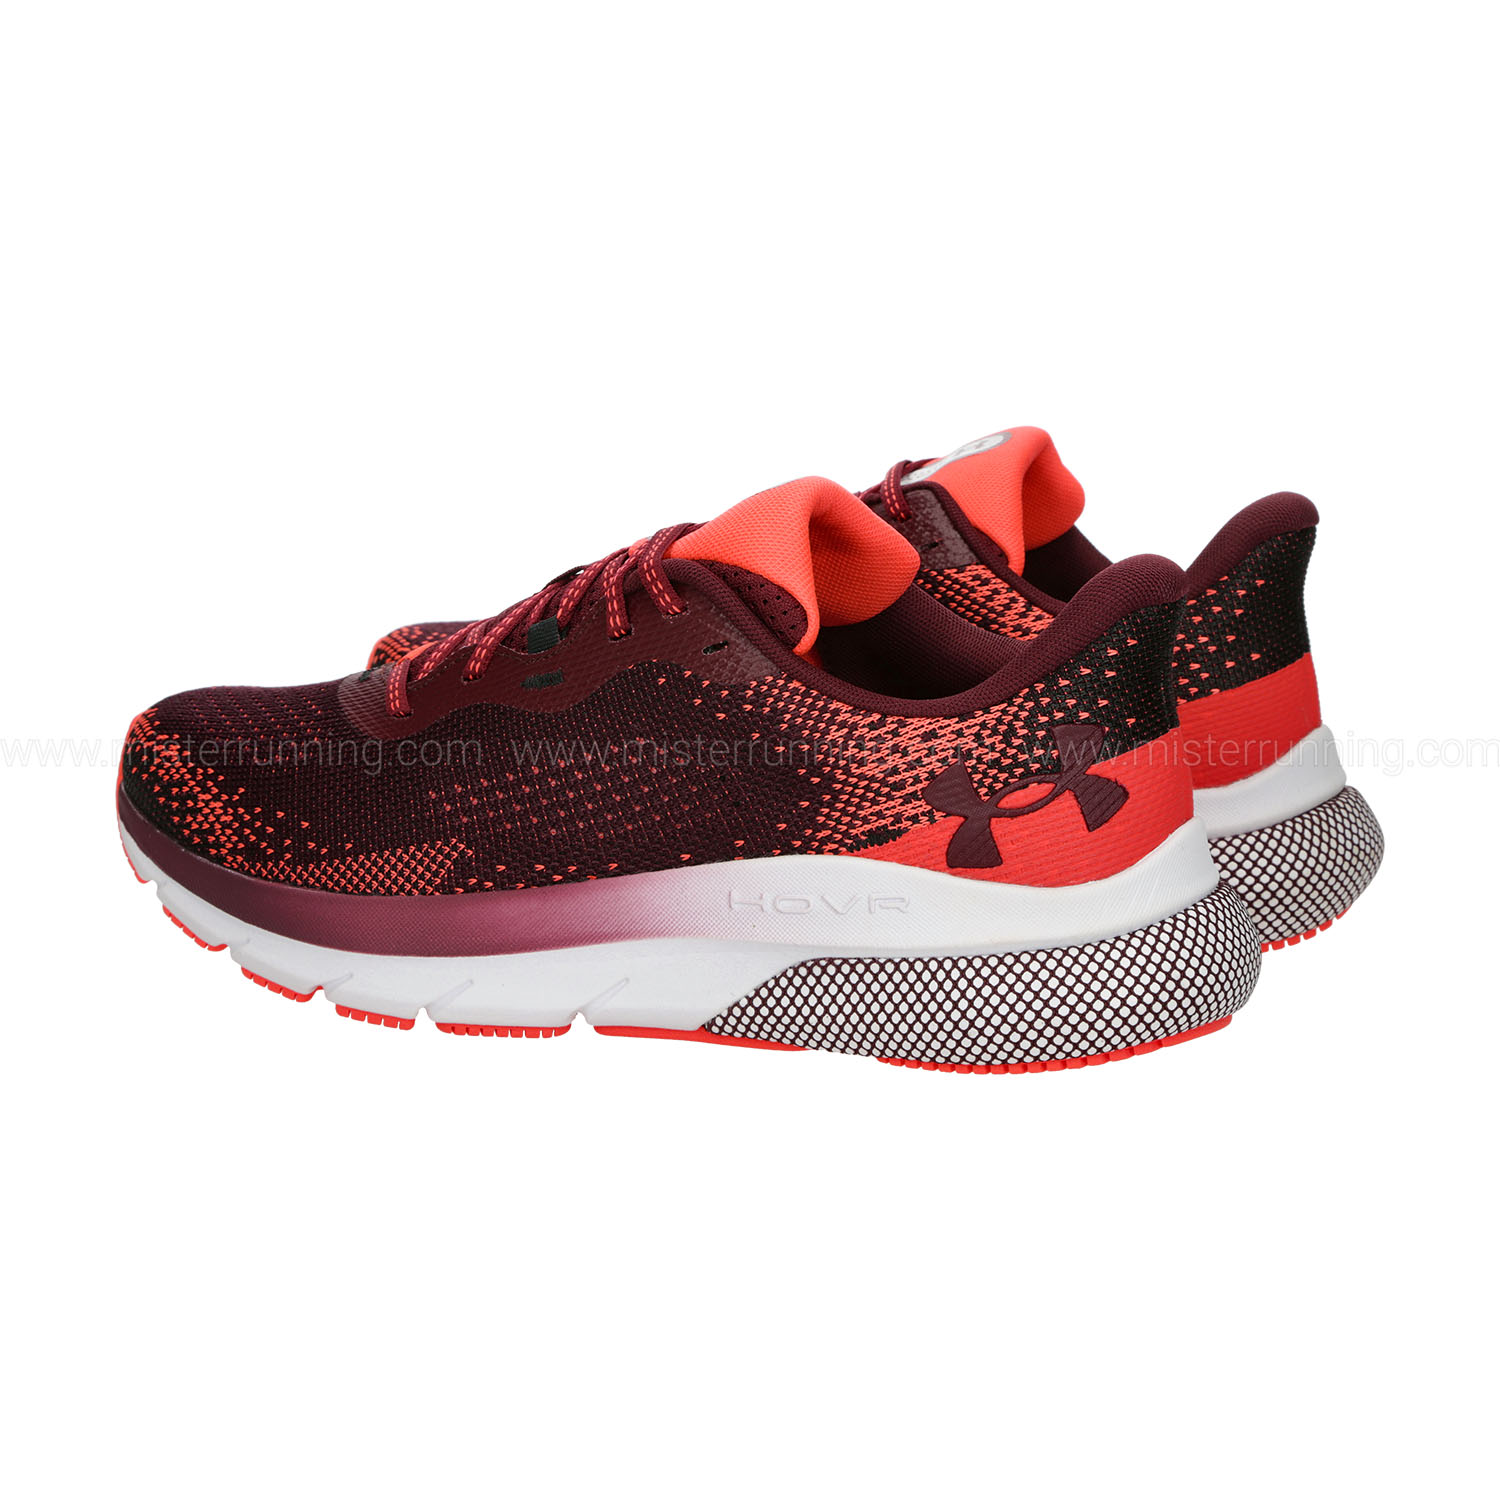 Under Armour HOVR Turbulence 2 - Deep Red